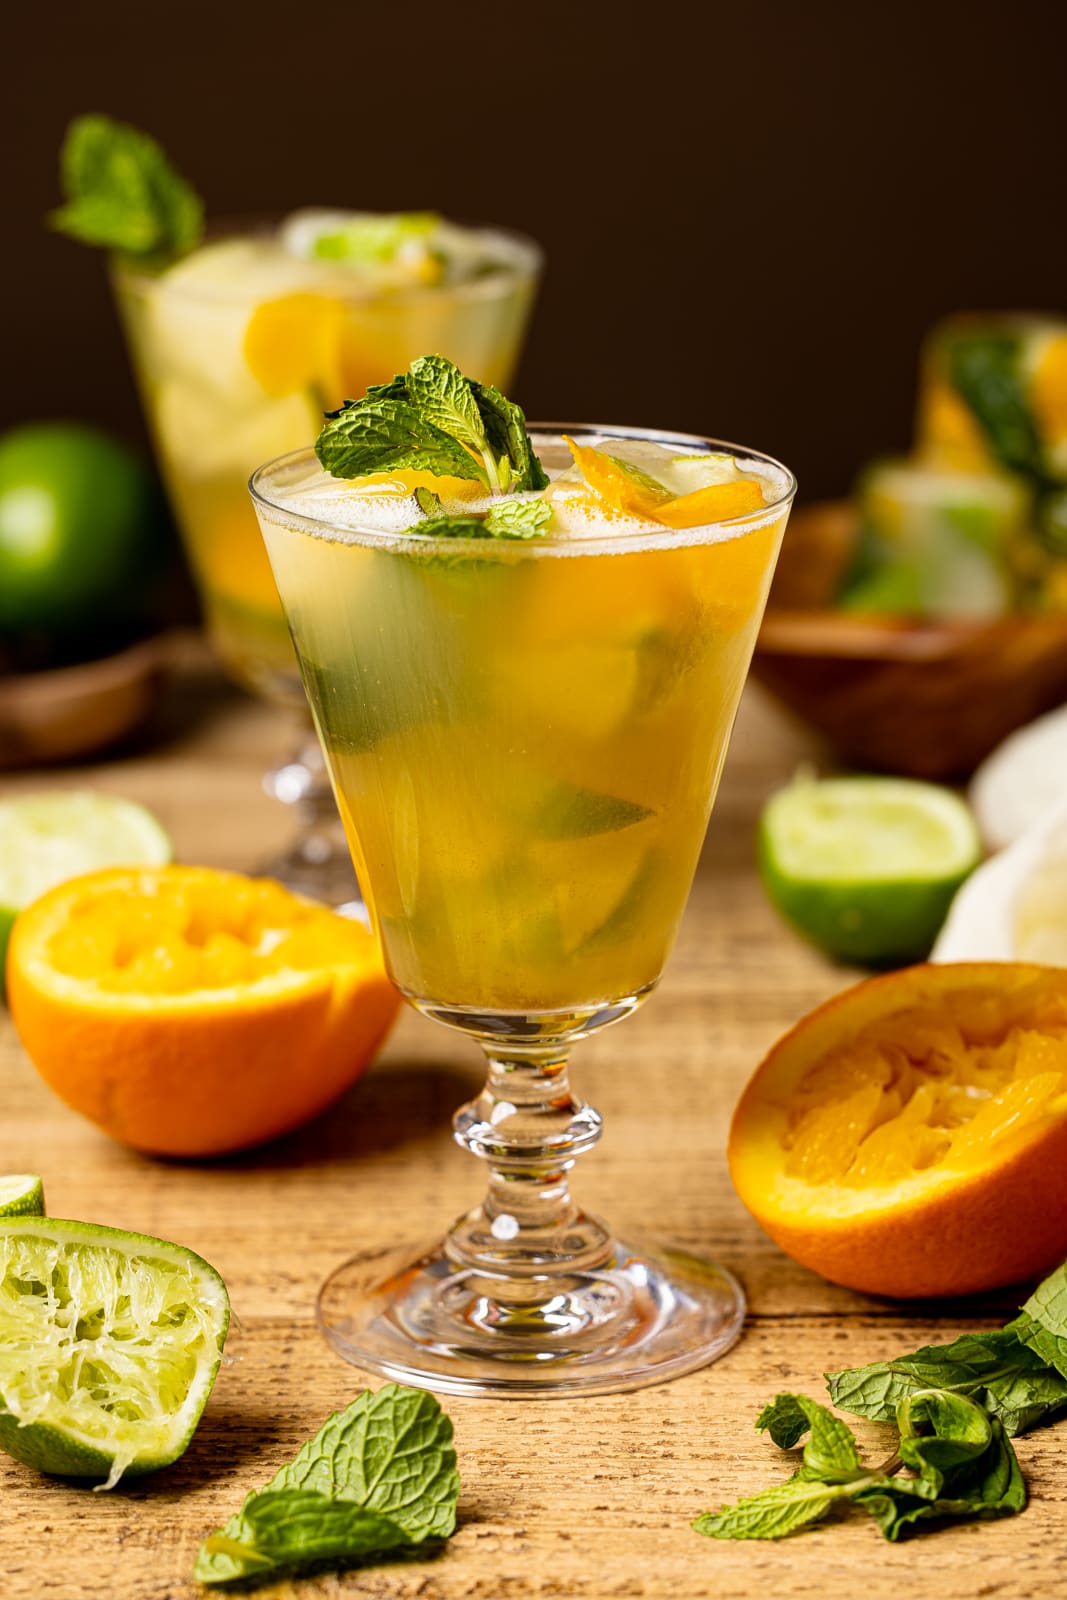 Mocktail in two tall glasses on a brown wood table with halved oranges, limes, and ice cubes in the background.